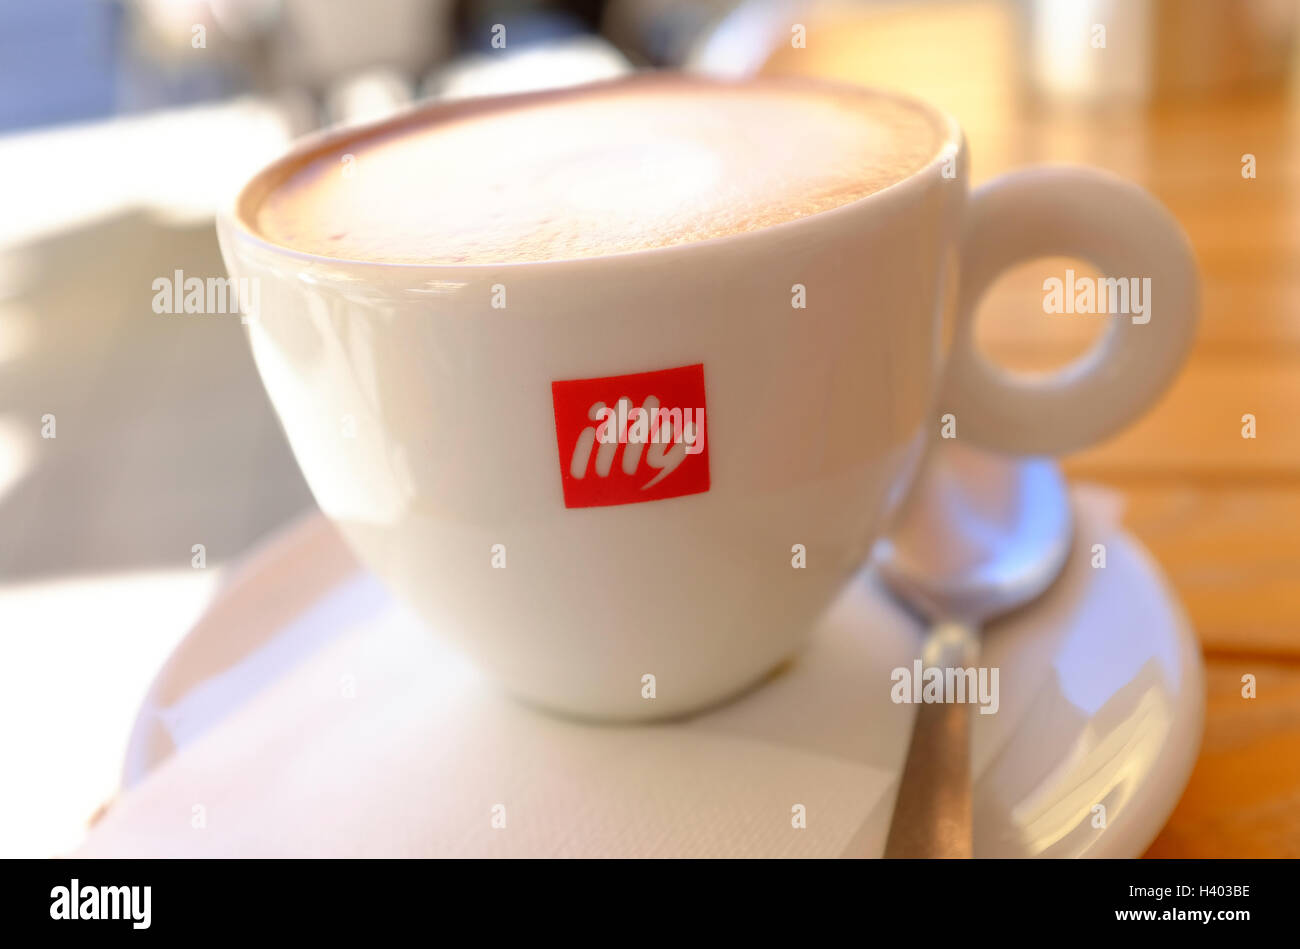 https://c8.alamy.com/comp/H403BE/cup-of-illy-coffee-H403BE.jpg